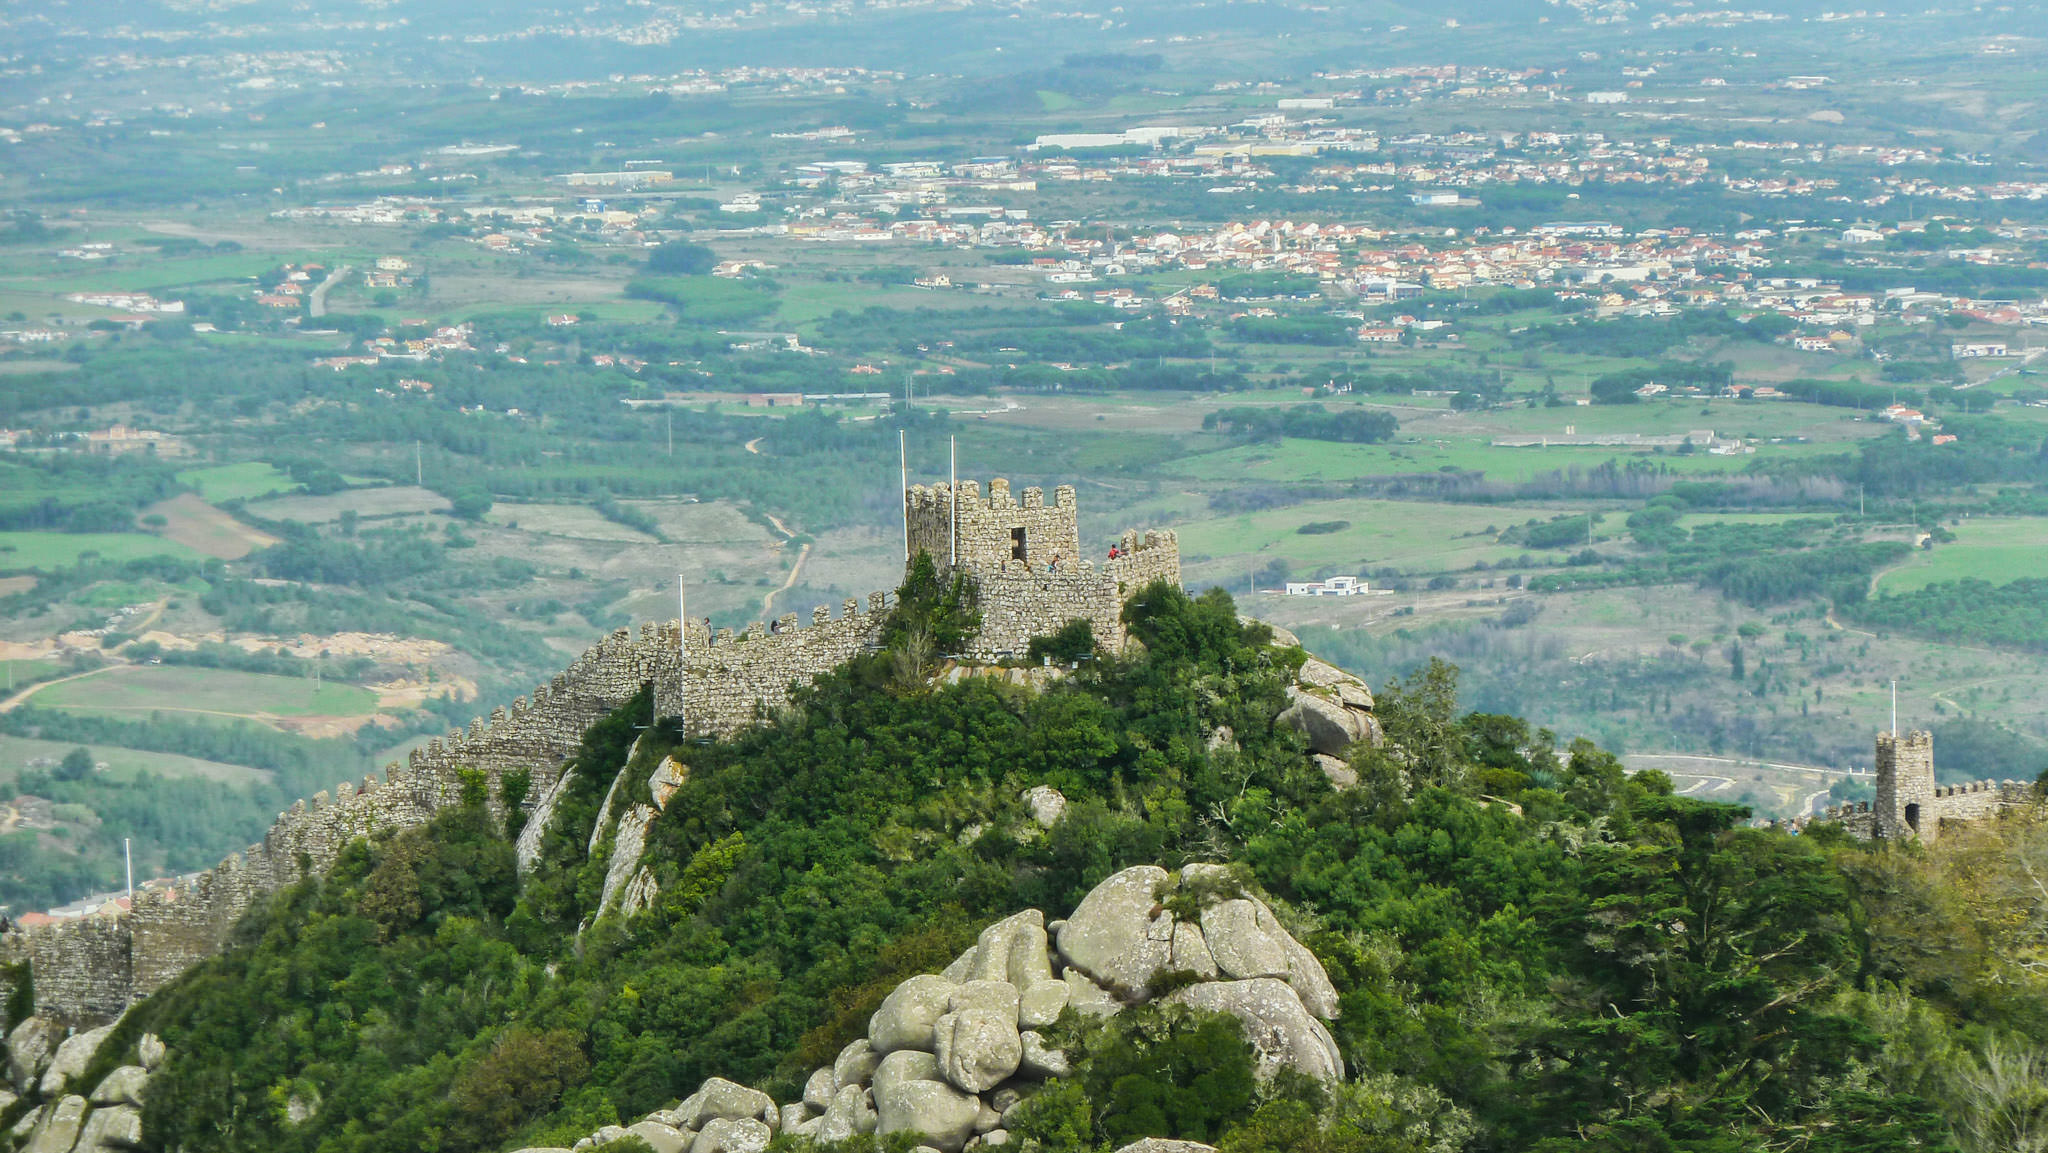 Castelo dos Mouros from Park and National Palace of Pena - Sintr